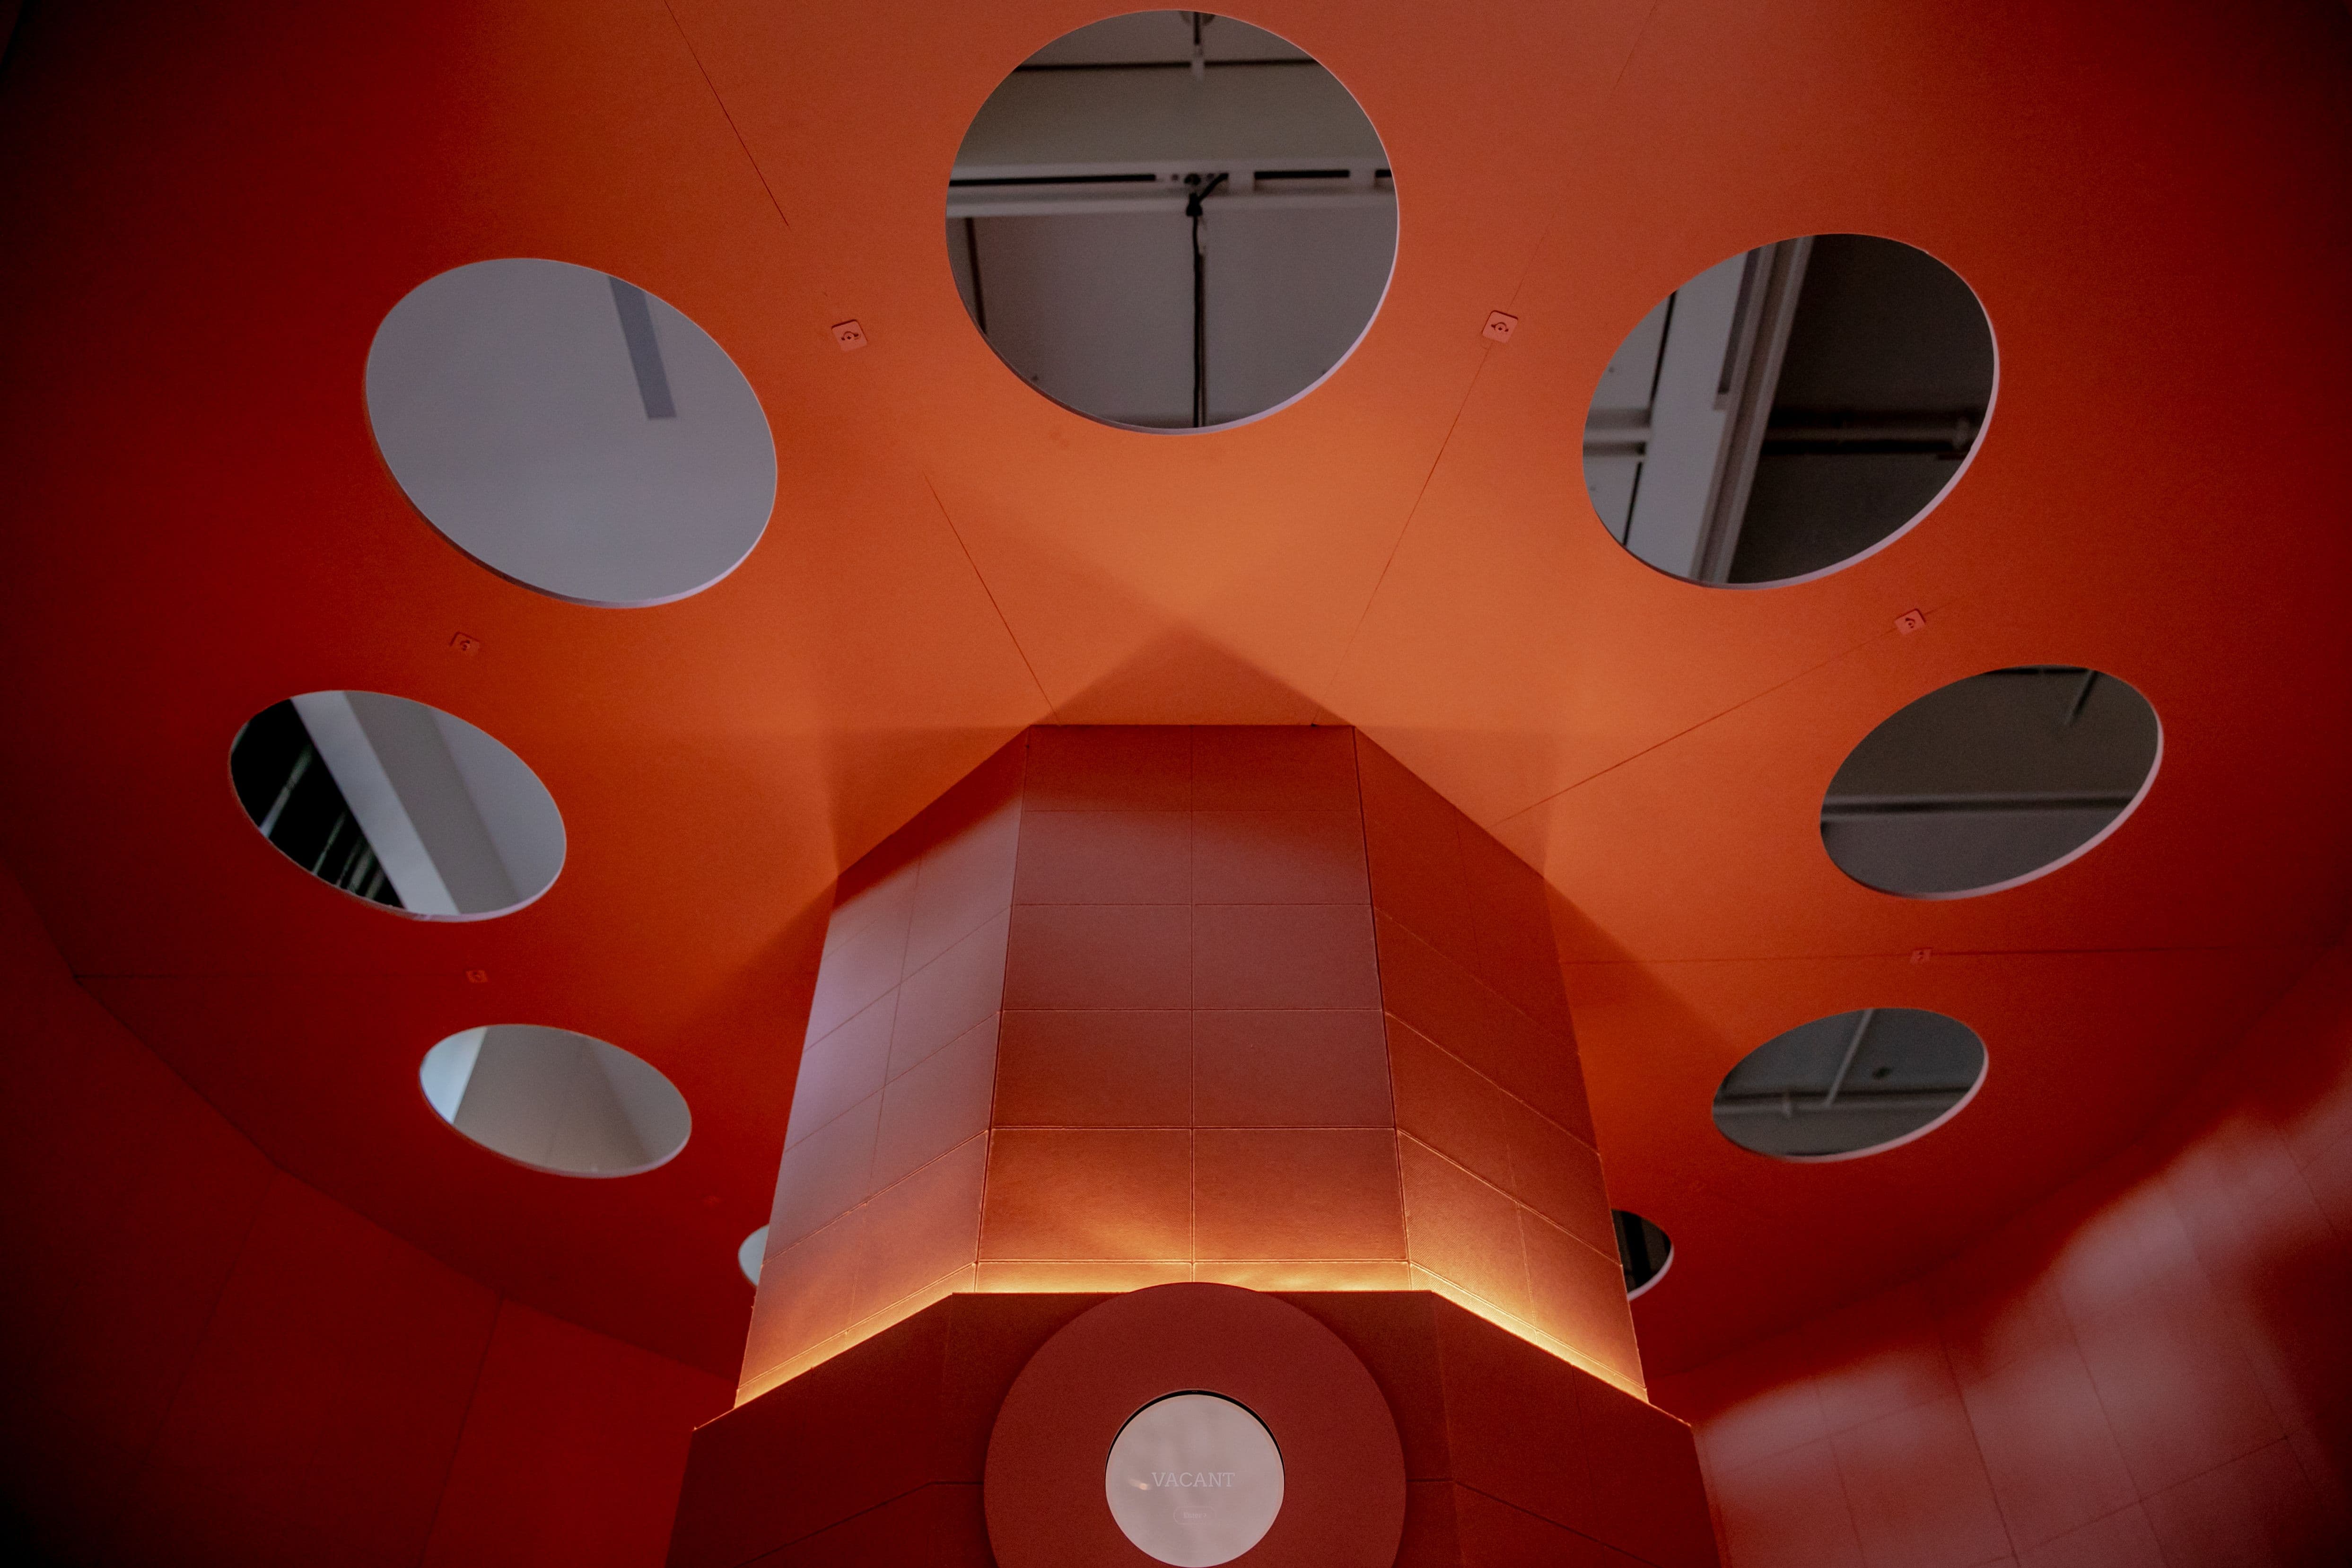 Ceiling of pink toilet cubicle, with circle cutouts through which the ceiling of the gallery can be seen